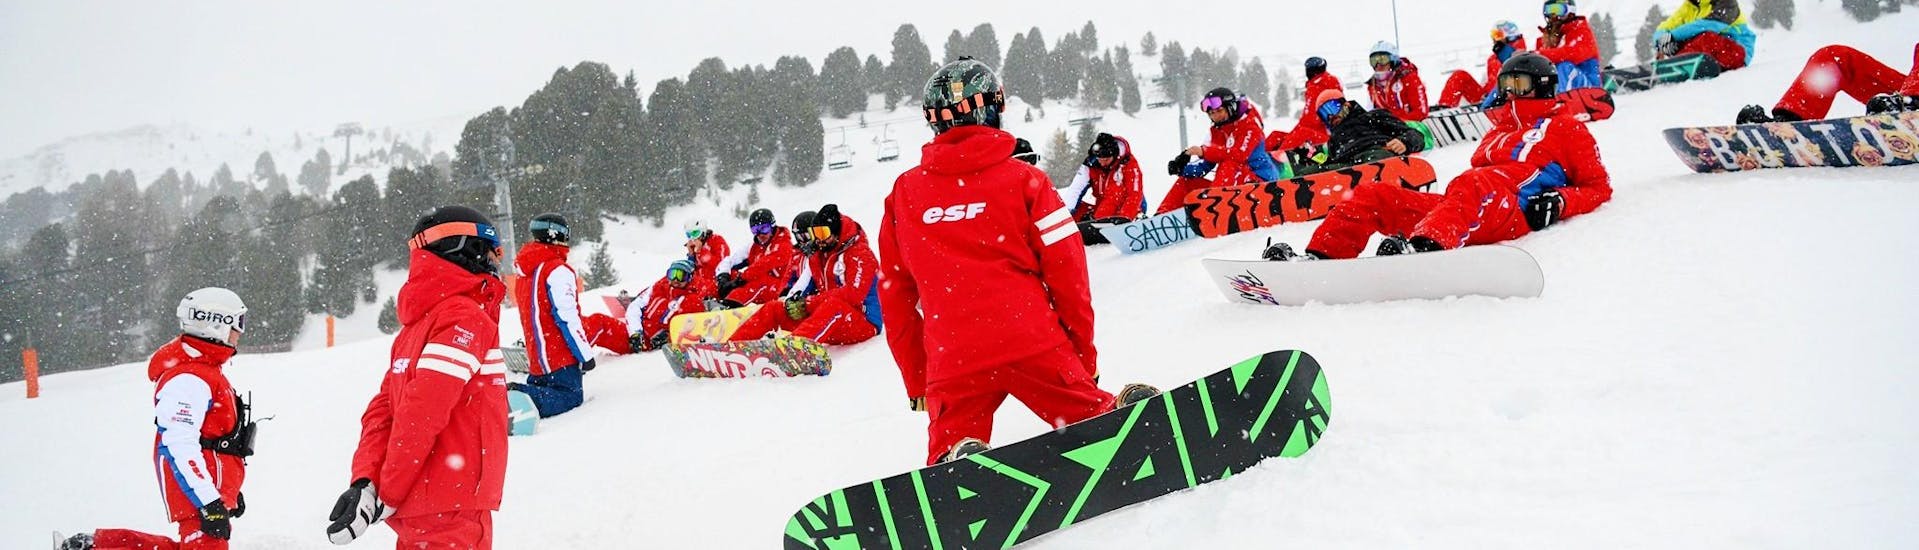 snowboarding-lessons-from-7-years-esf-la-plagne-hero